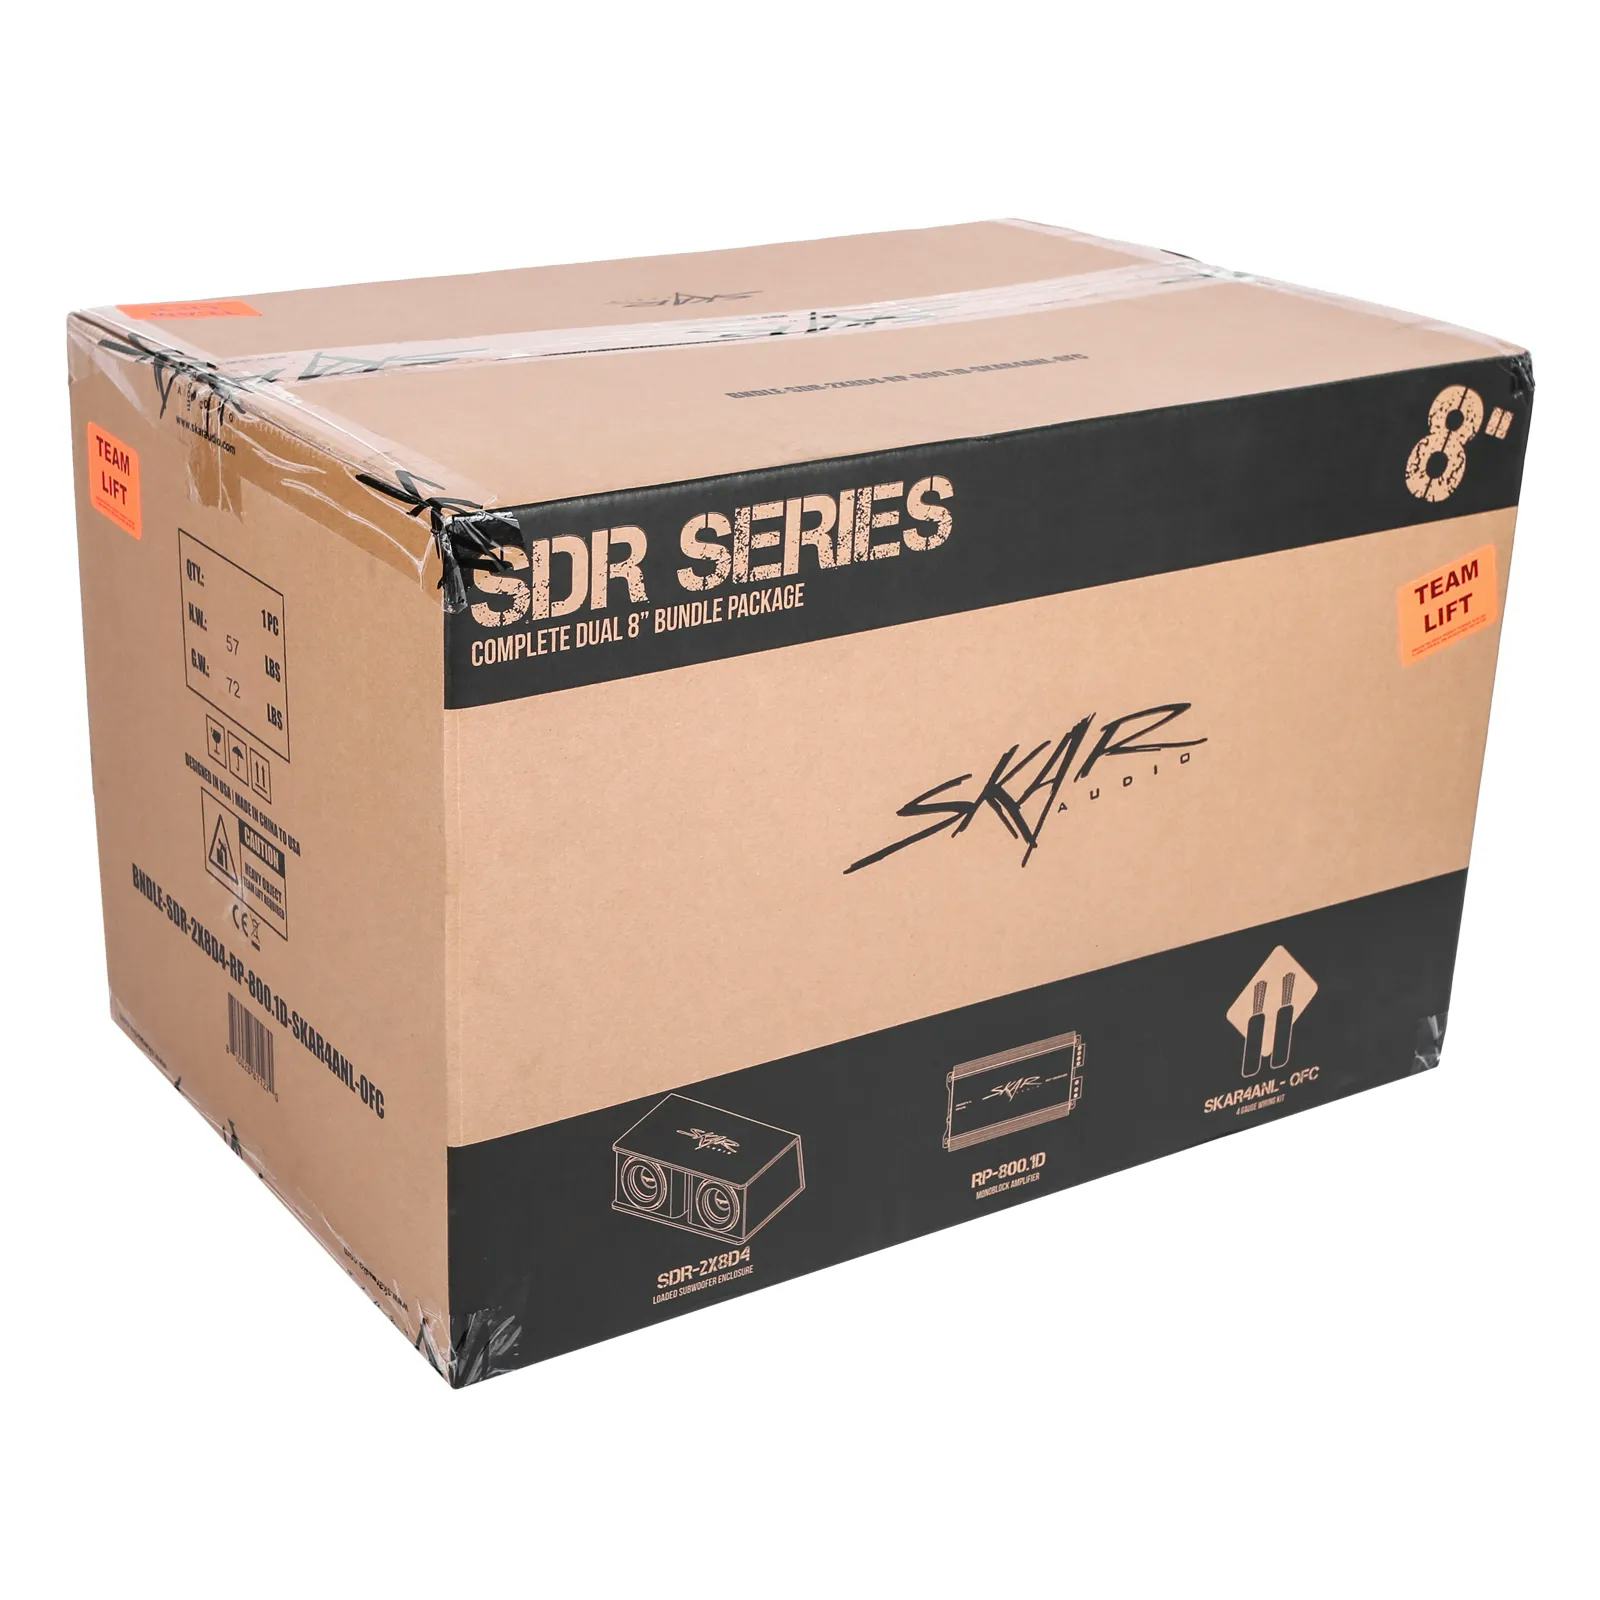 Dual 8" 1,400 Watt SDR Series Complete Subwoofer Package with Vented Enclosure and Amplifier #6